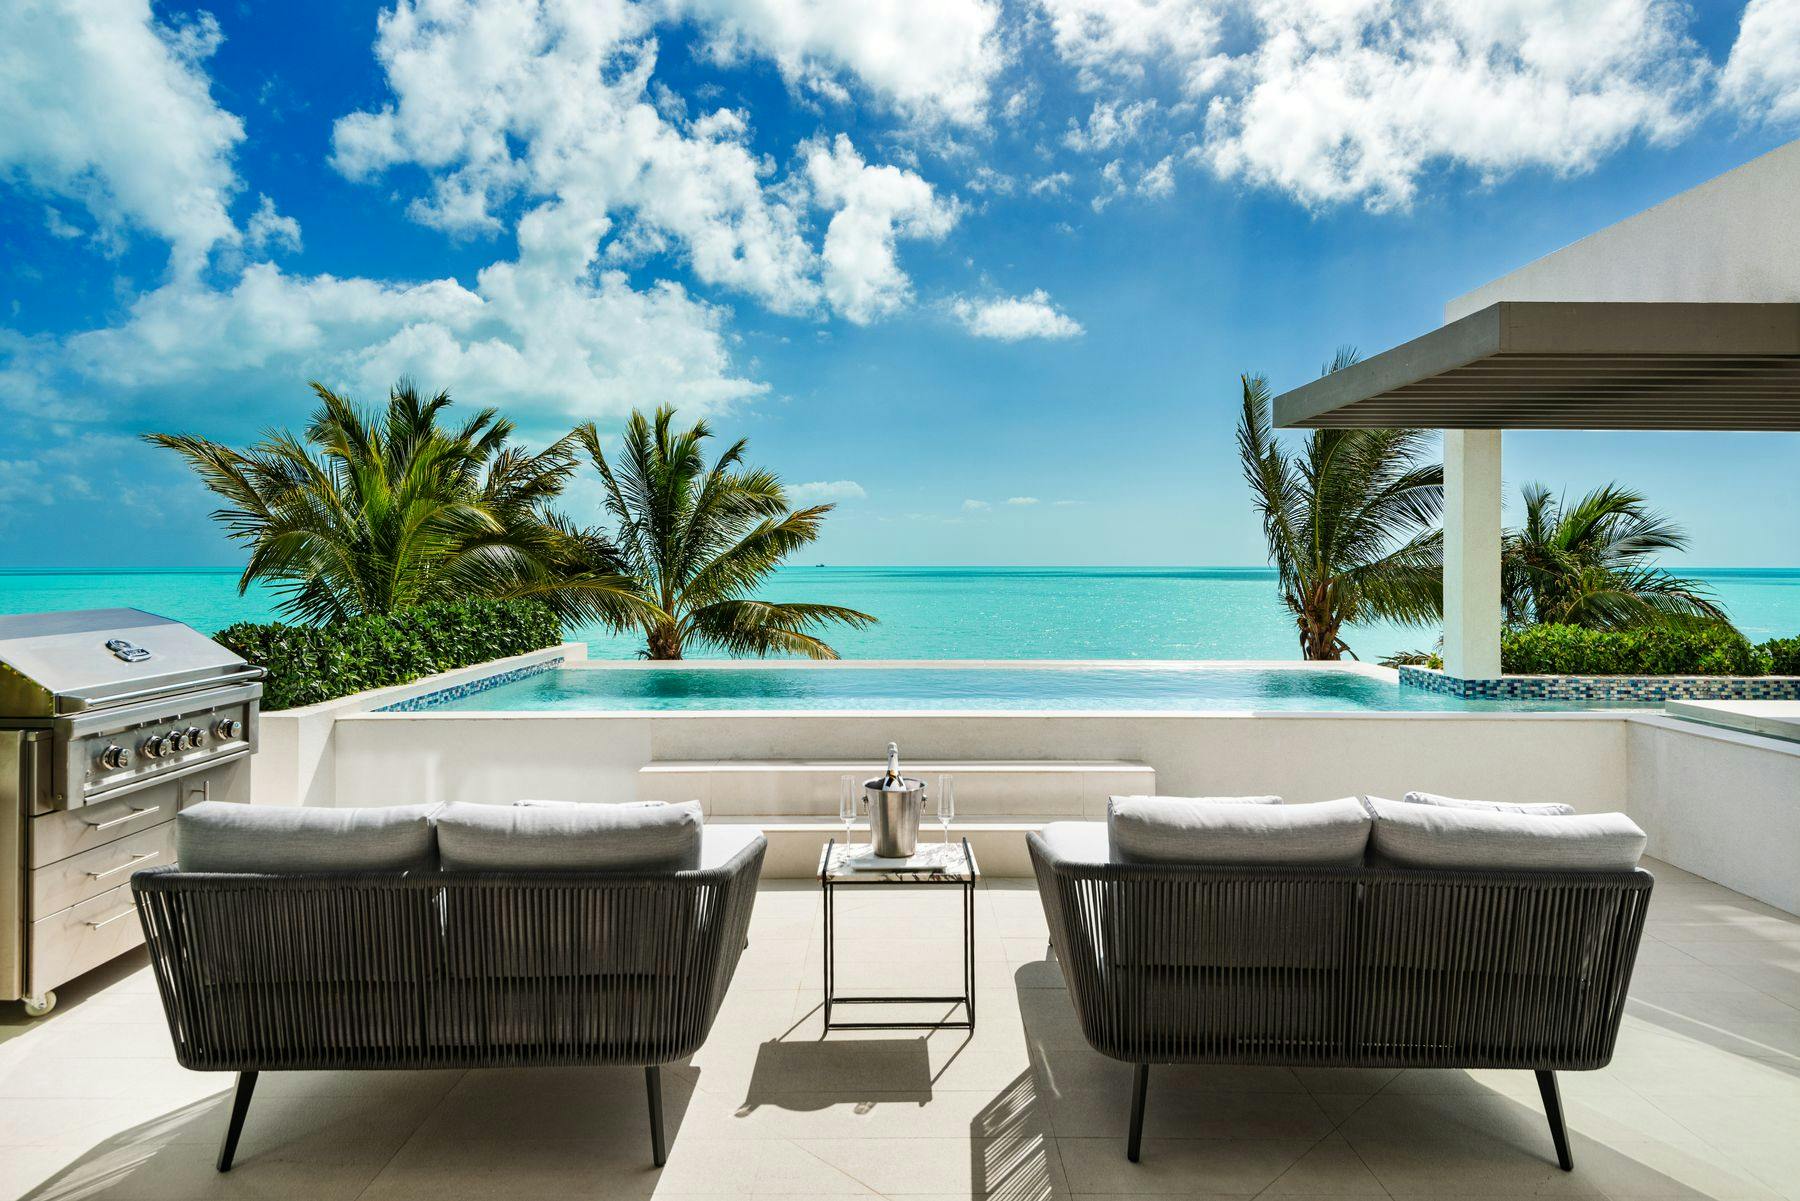 Outdoor living space with a private pool at a Turks and Caicos vacation rental.